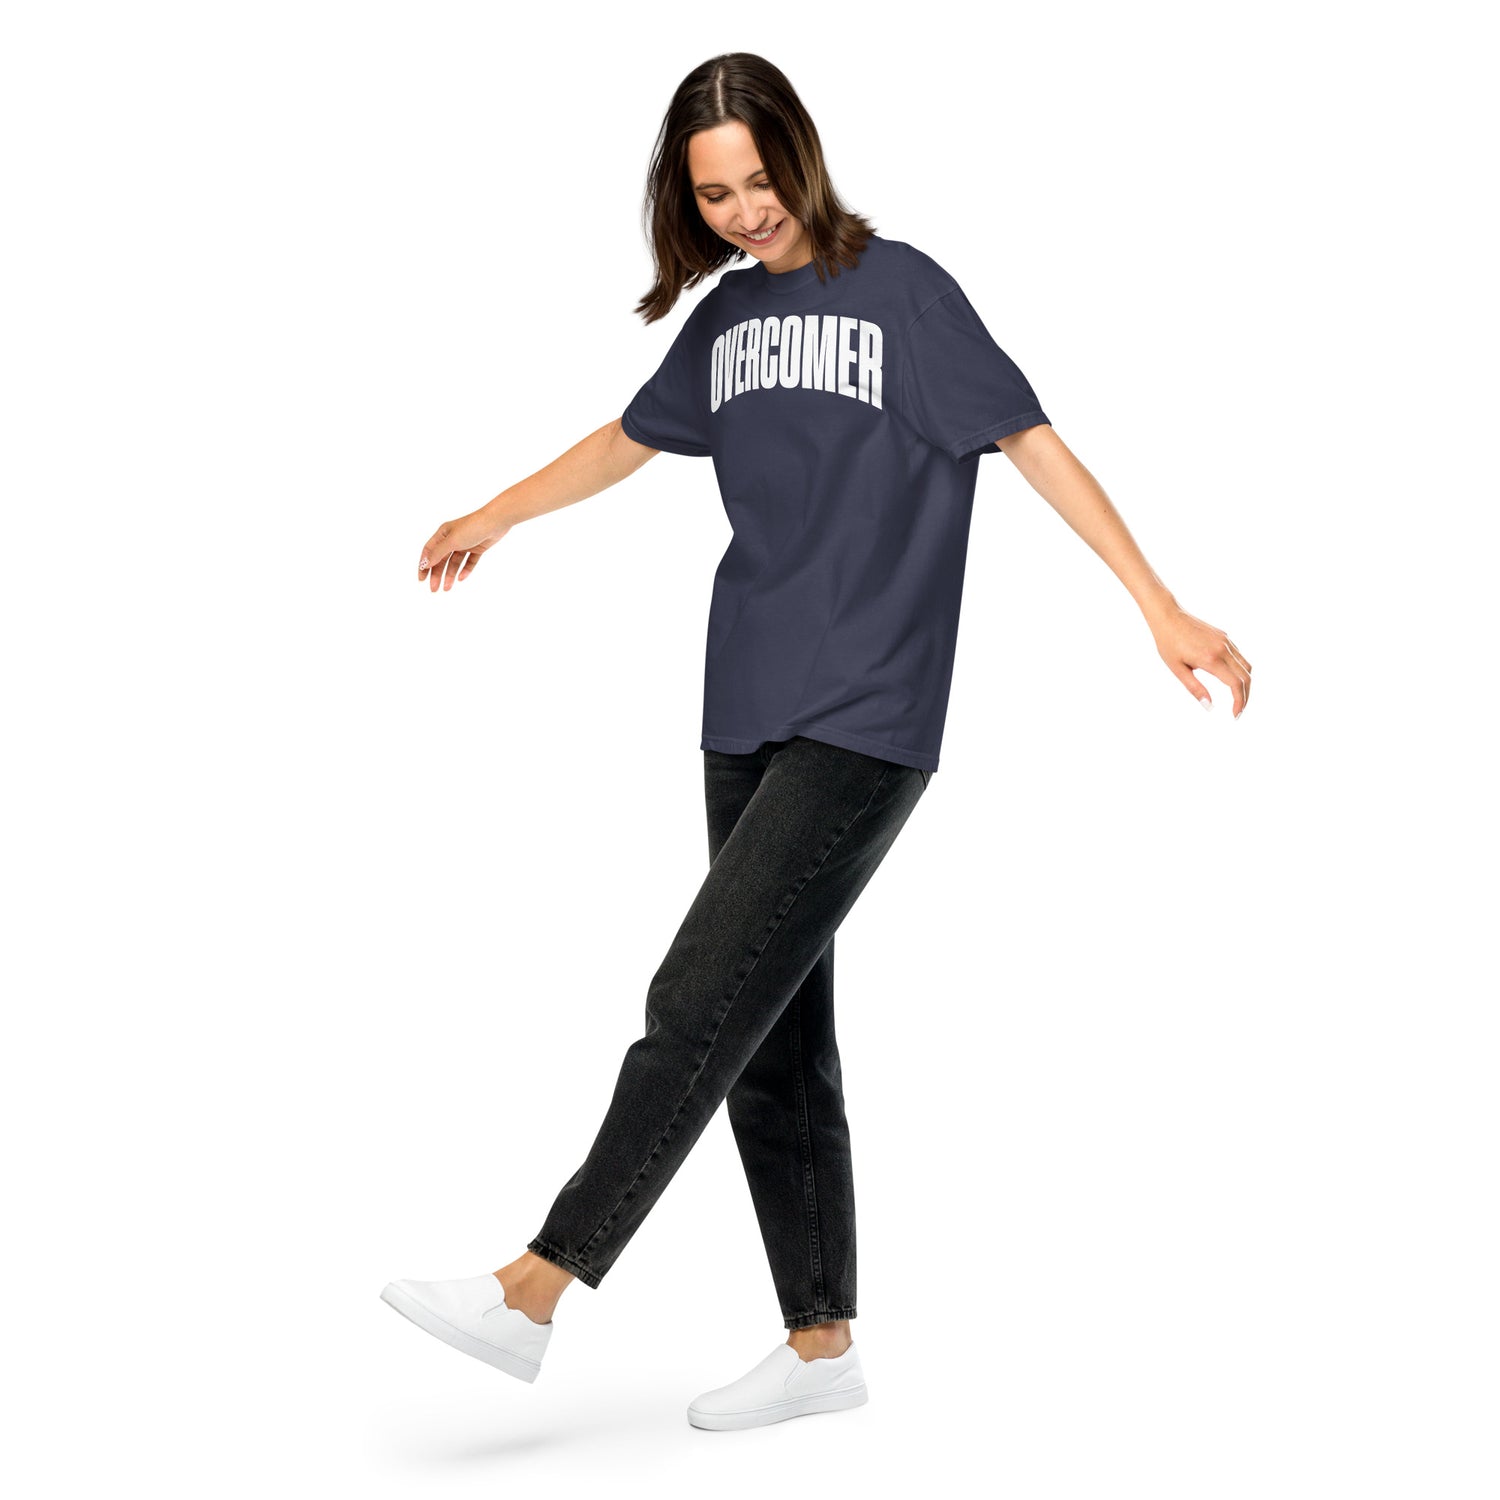 Christian T-Shirts for Women | Christian Clothing | One Way Christian Store